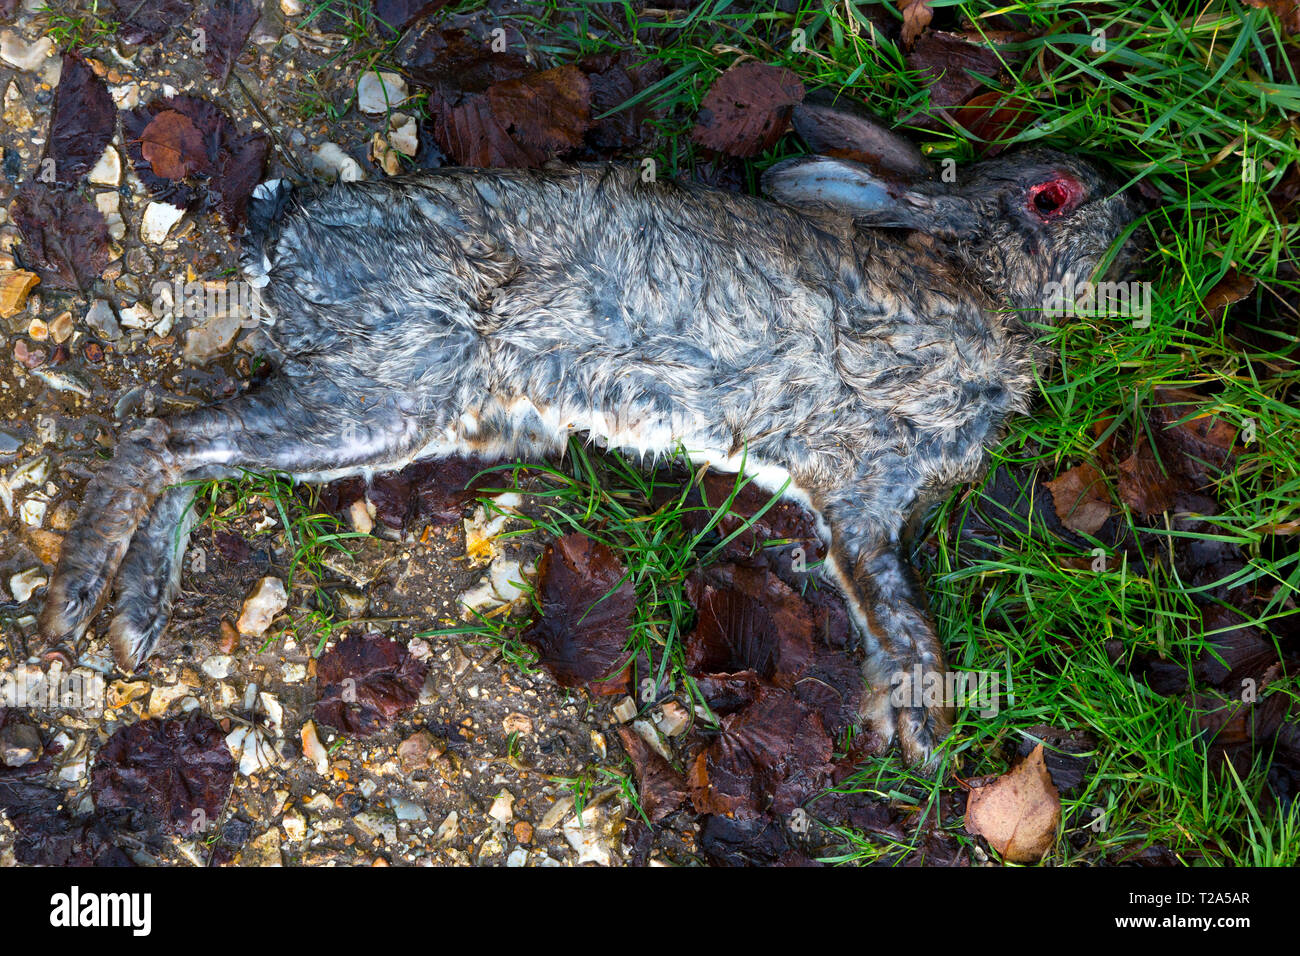 dead,rabbit,in,the,rain,with,eye,eaten,out,lying,on,grass,verge,near,road,England, Stock Photo